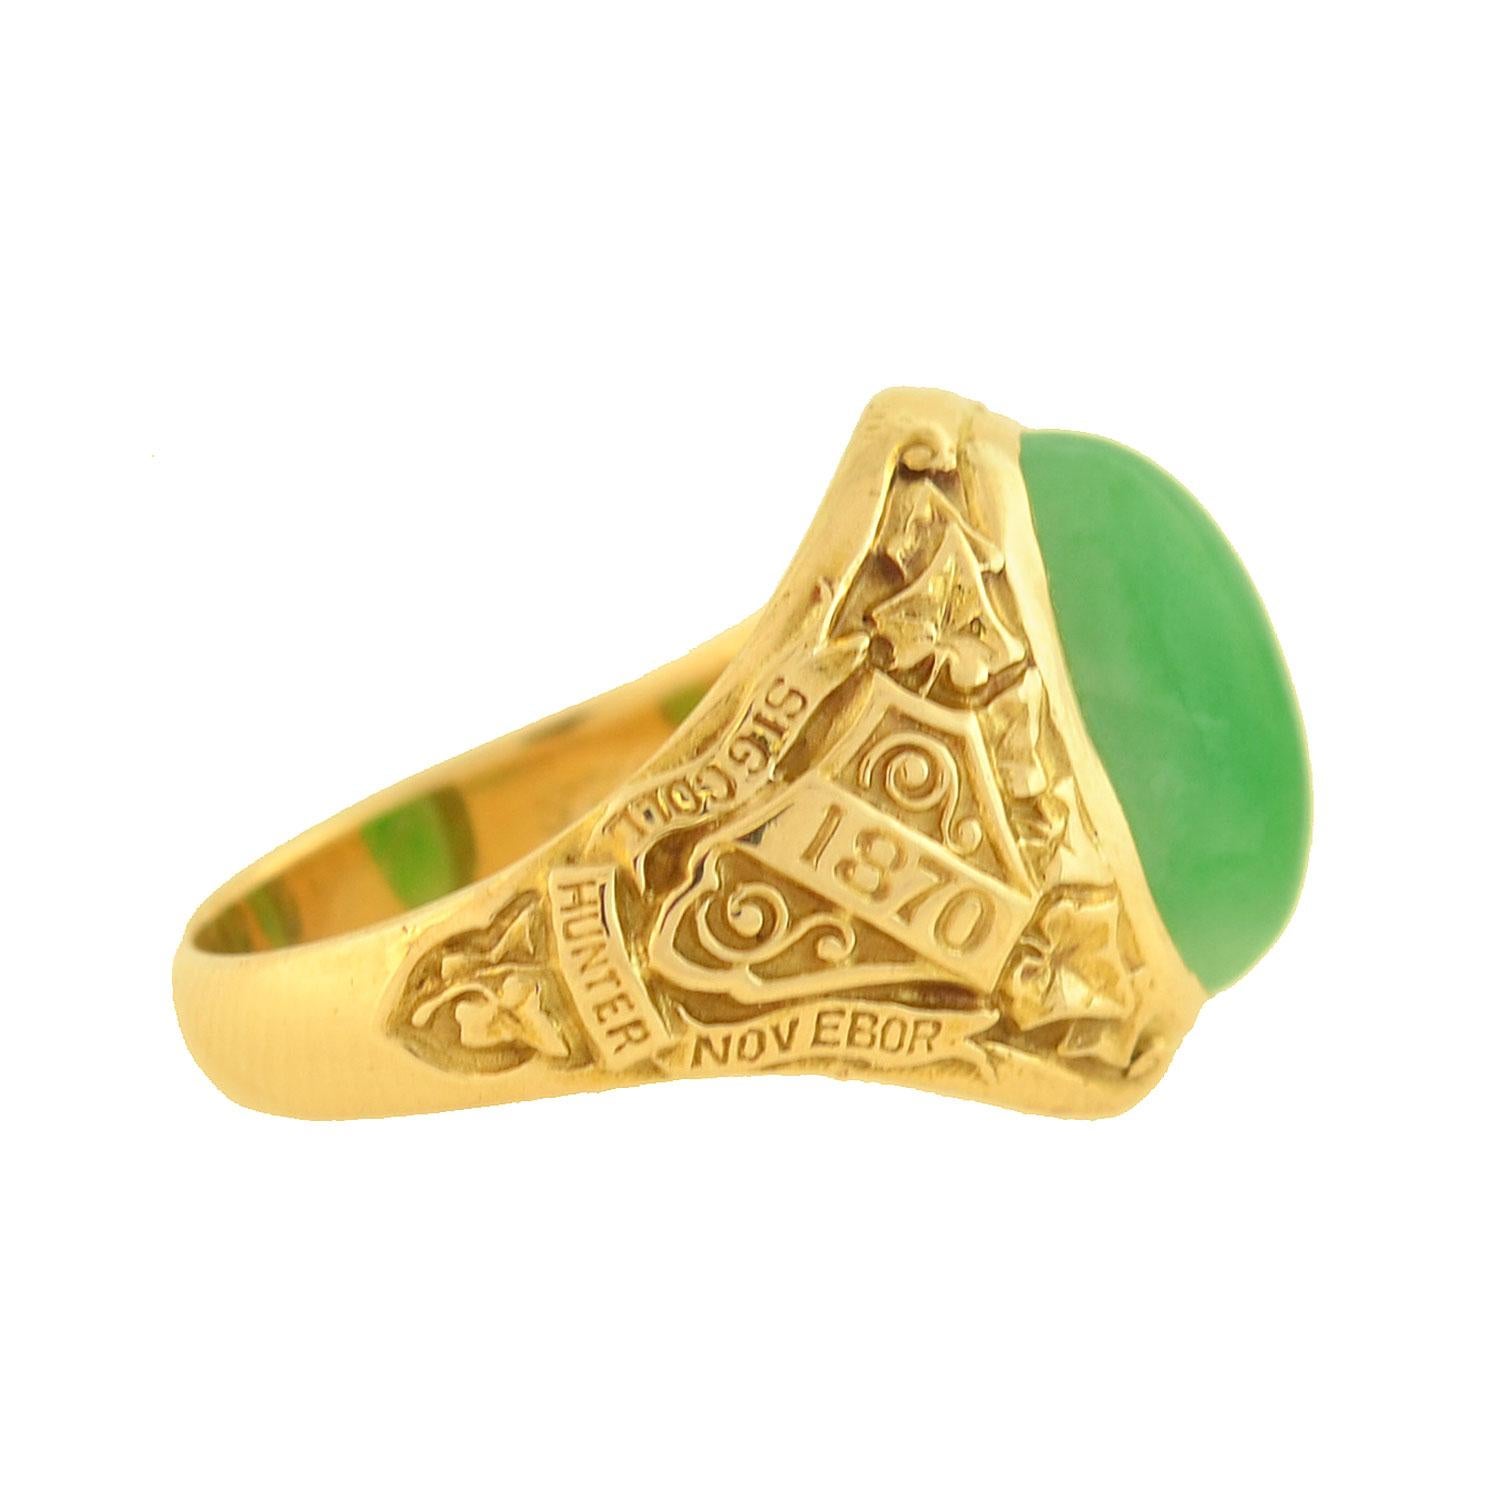 A wonderful commemorative class ring from the late Art Deco (ca1928) era, manufactured by legendary maker Tiffany & Company! Crafted in 14kt yellow gold, this striking piece from Hunter College features a gorgeous jade stone. Resting in the center